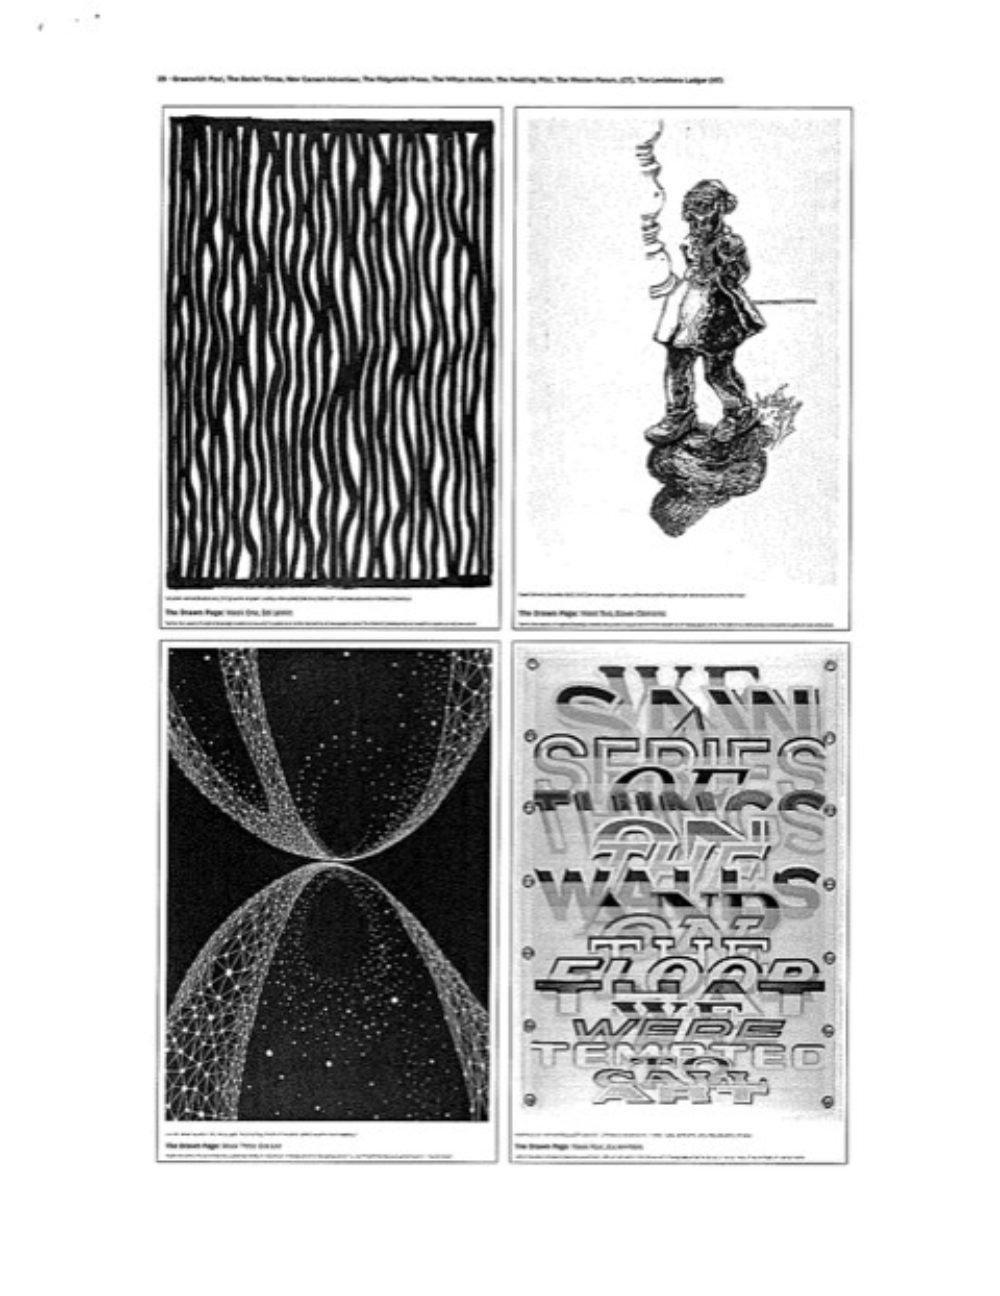 2x2 Grid of black and white images as printed in newspapers